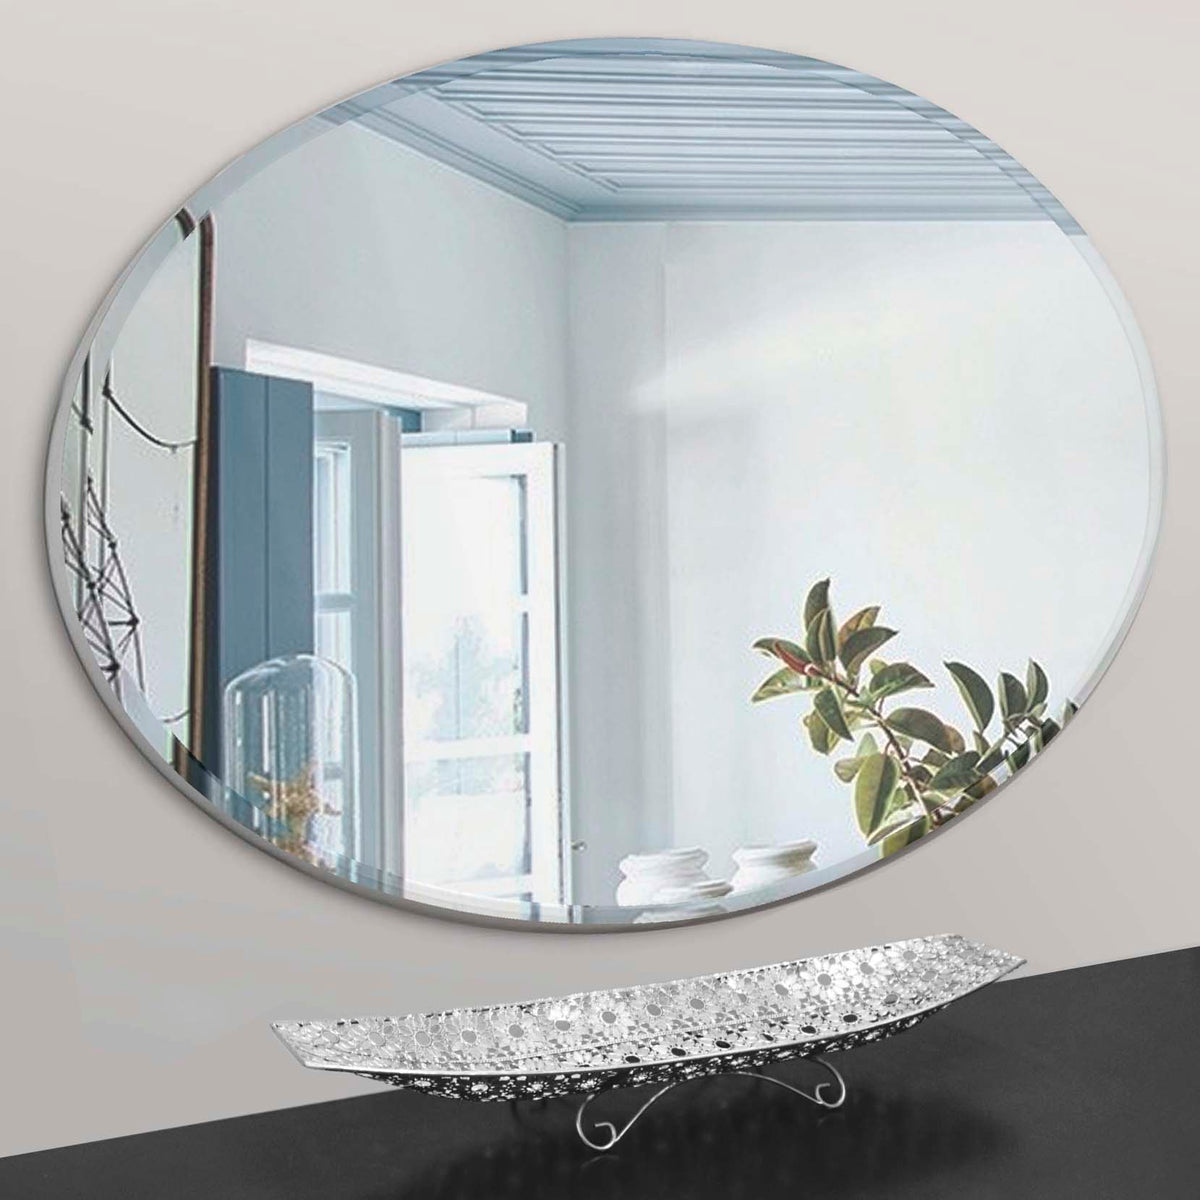 ‘Elipse’ Oval Mirror – Silver Tapered Frame